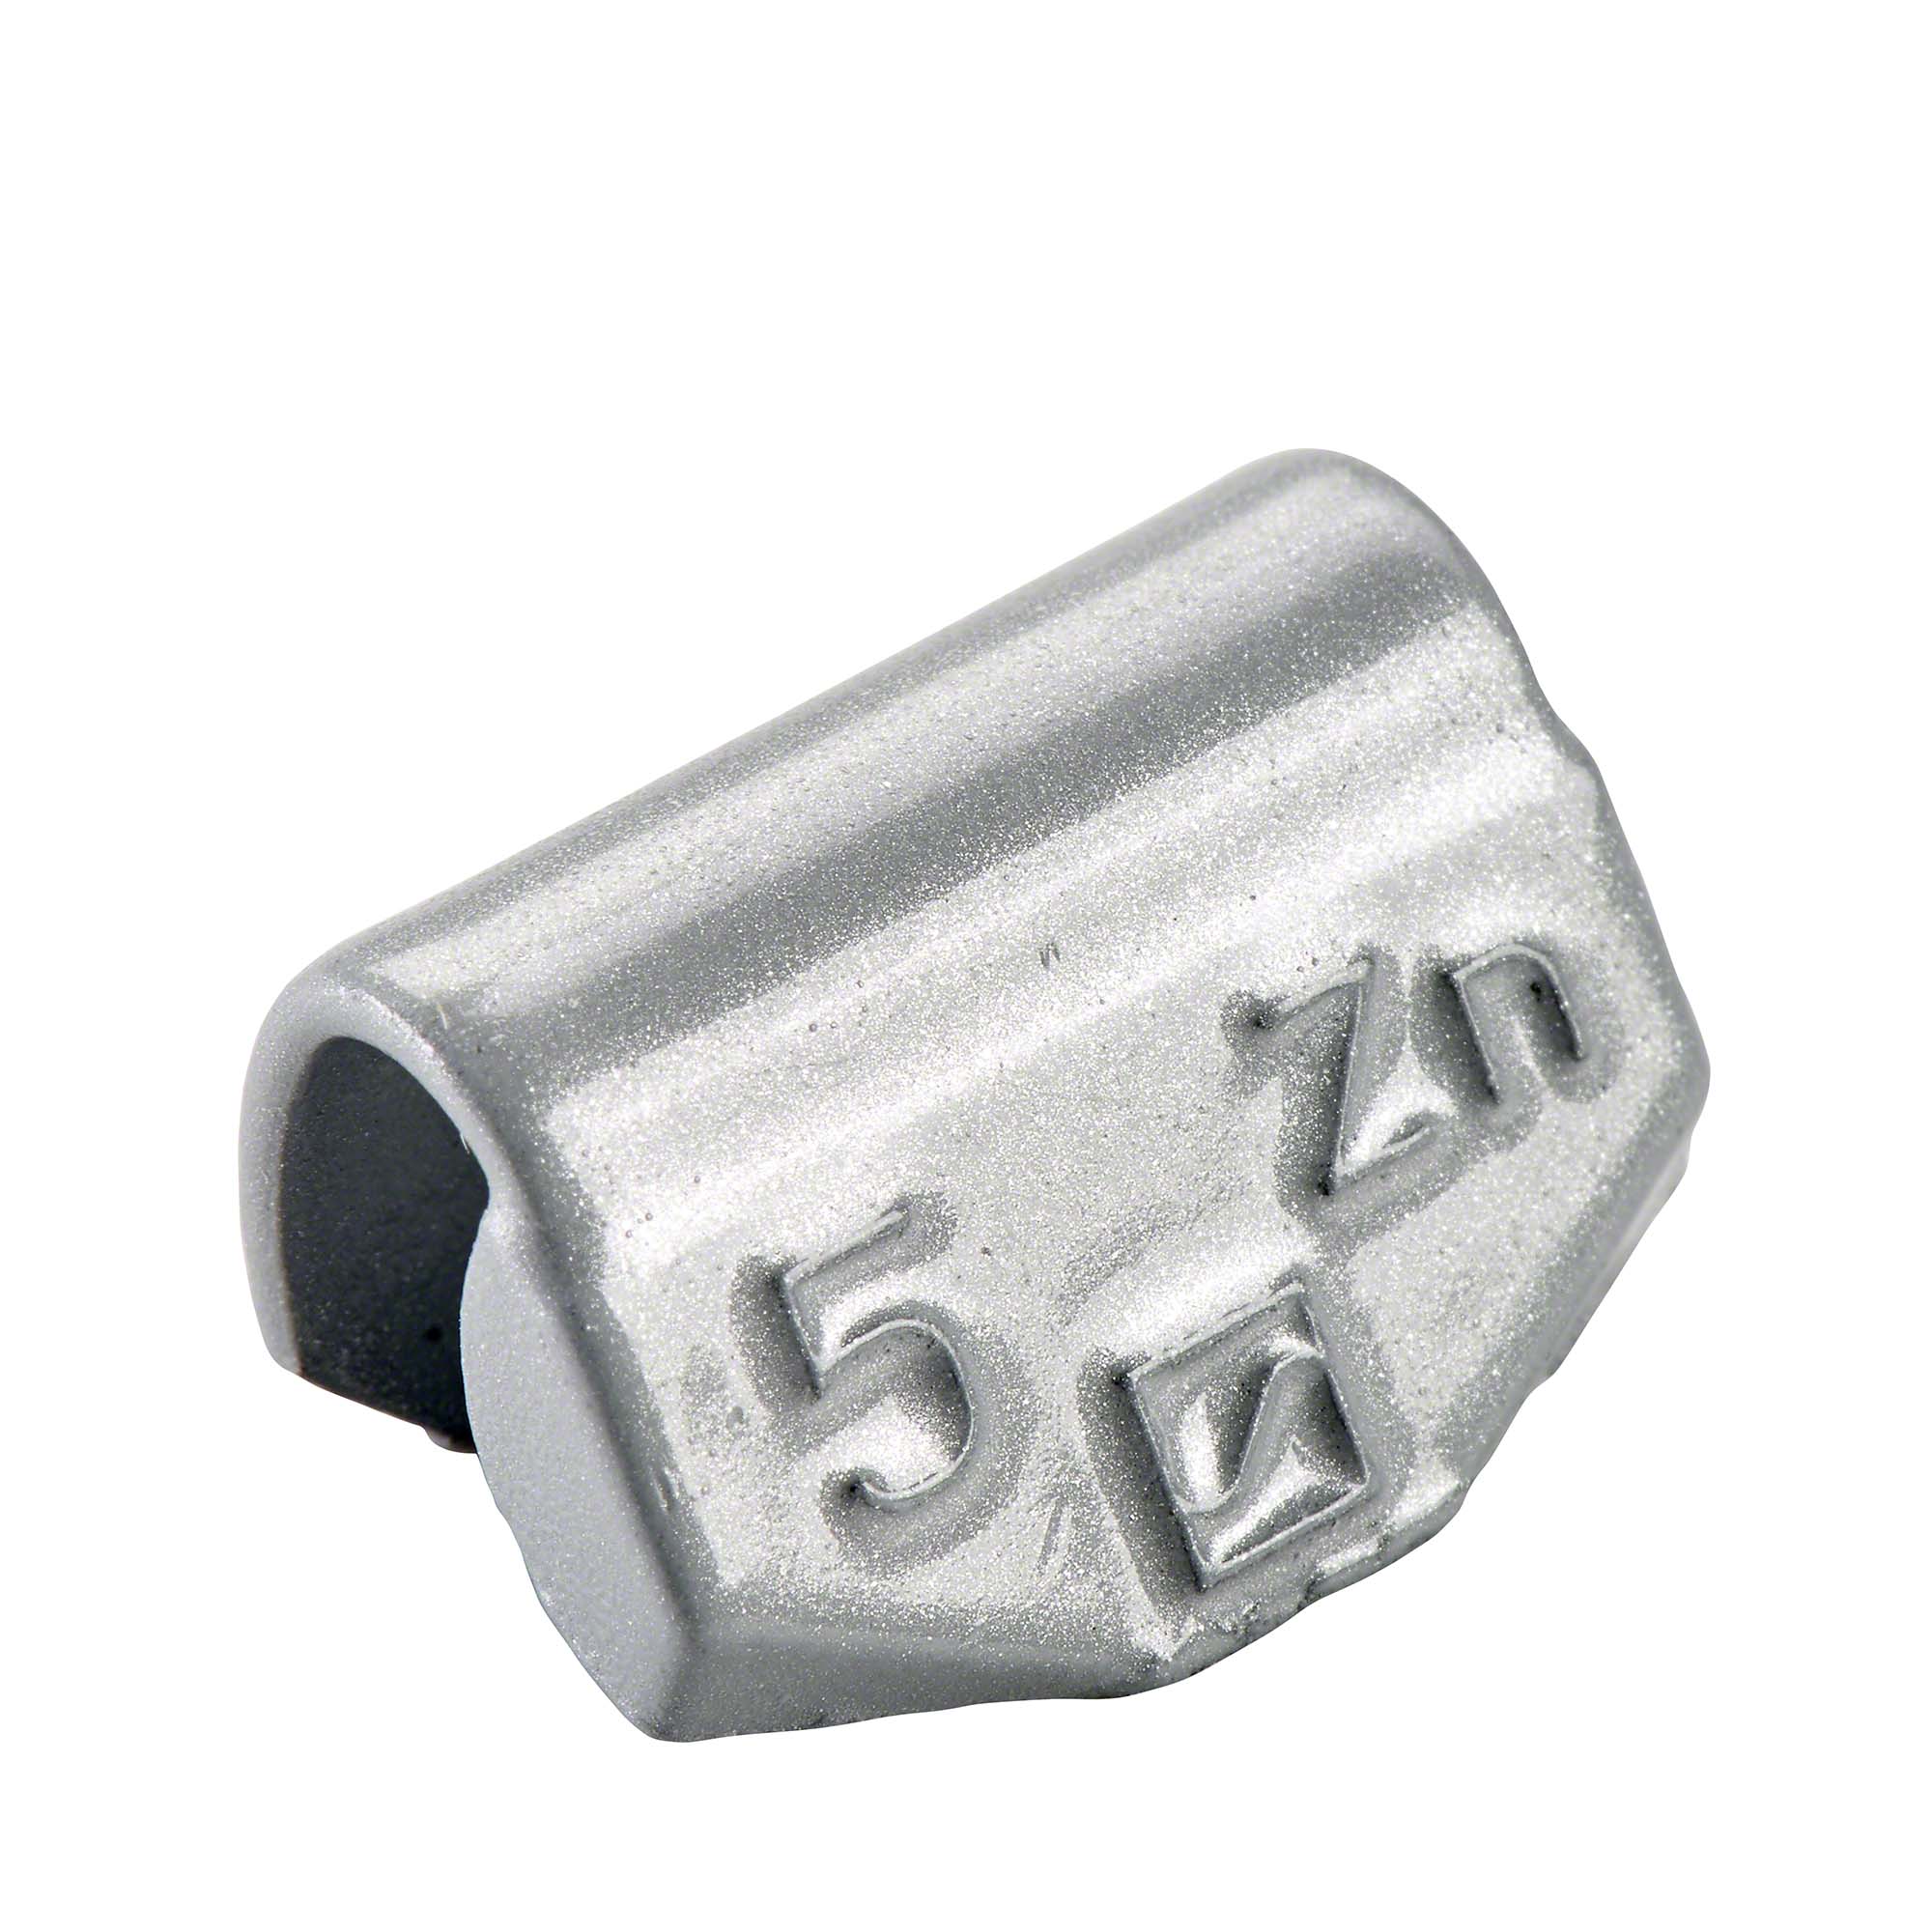 knock-on weight - Typ 664, 5 g, zinc, silver